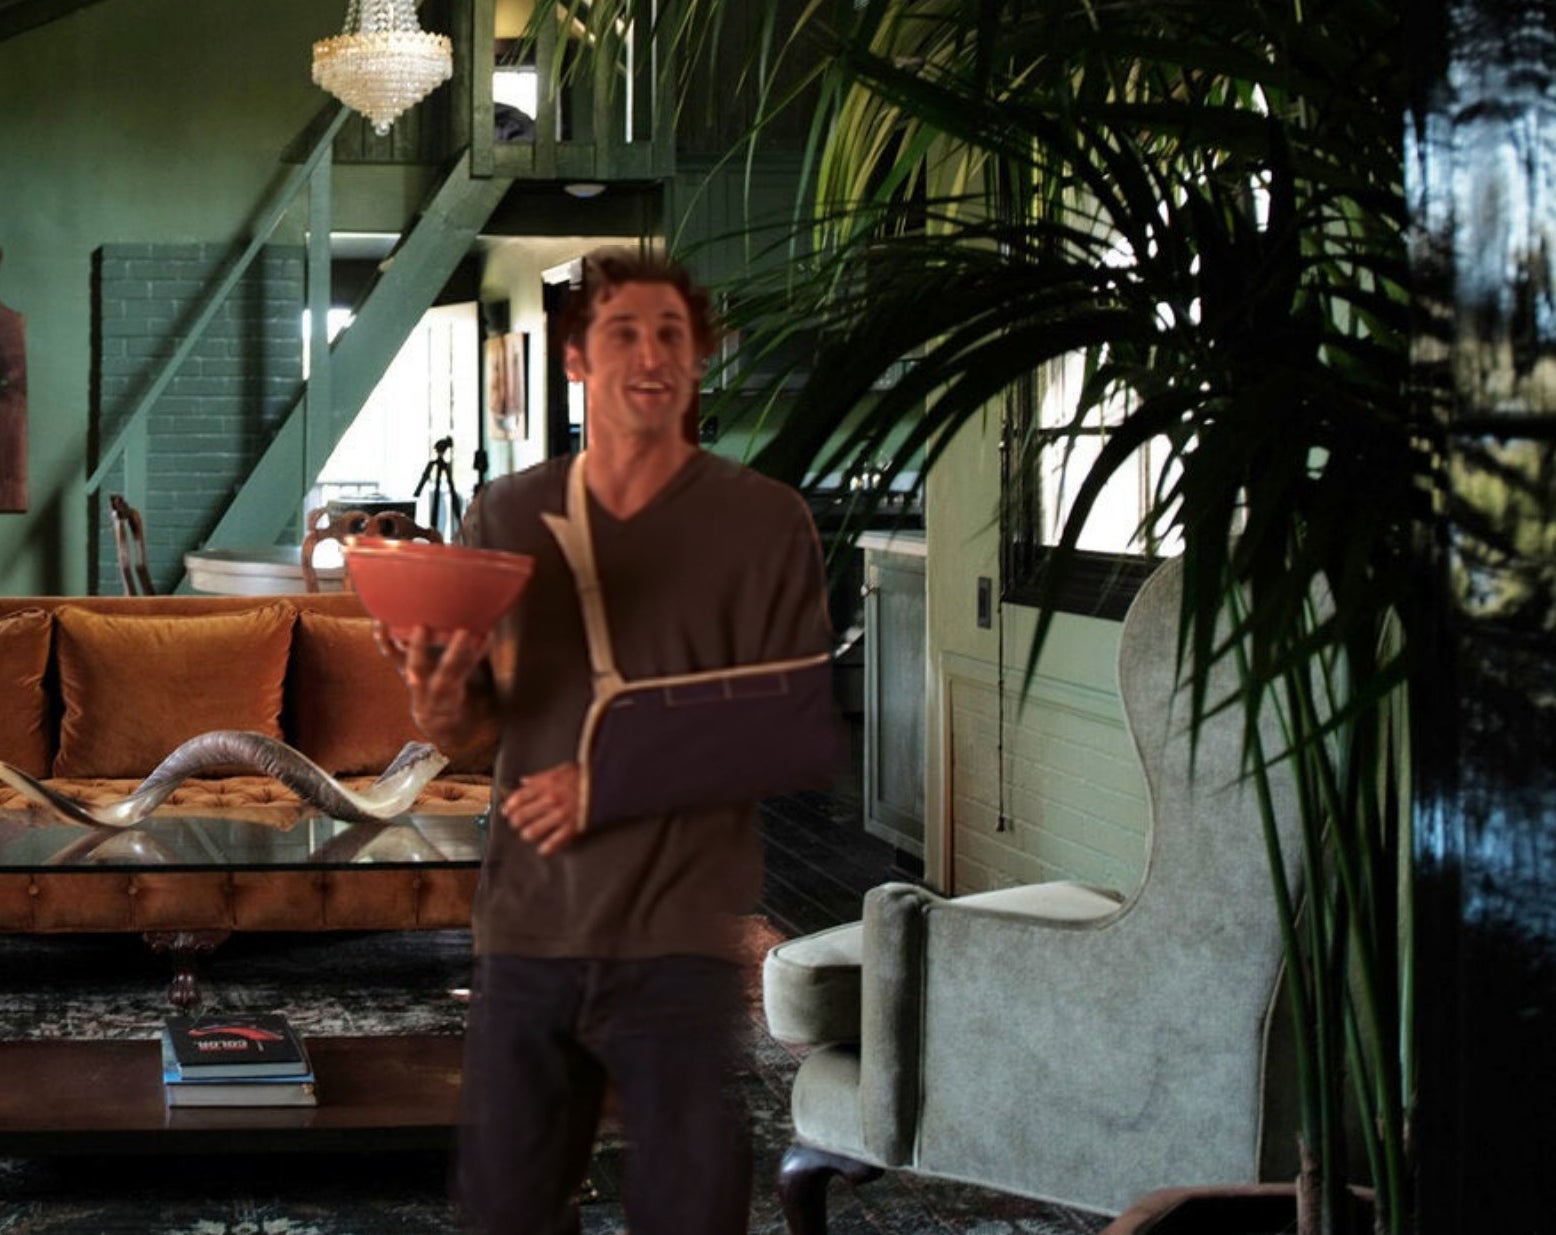 photoshopped version of said living room with patrick dempsey in it holding the bowl of popcorn